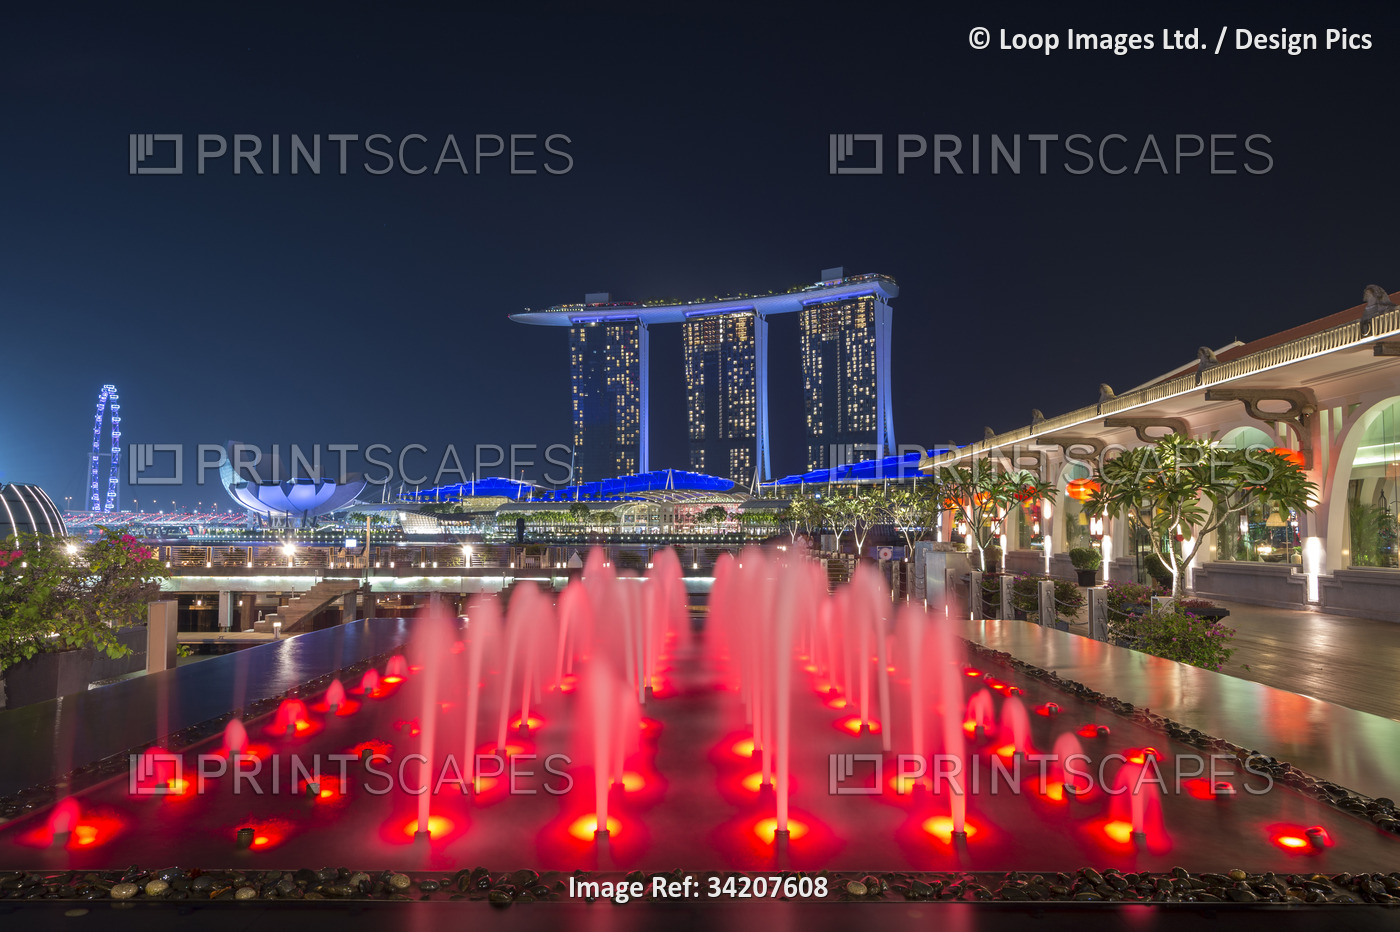 The Marina Bay Sands hotel at night with red water feature.